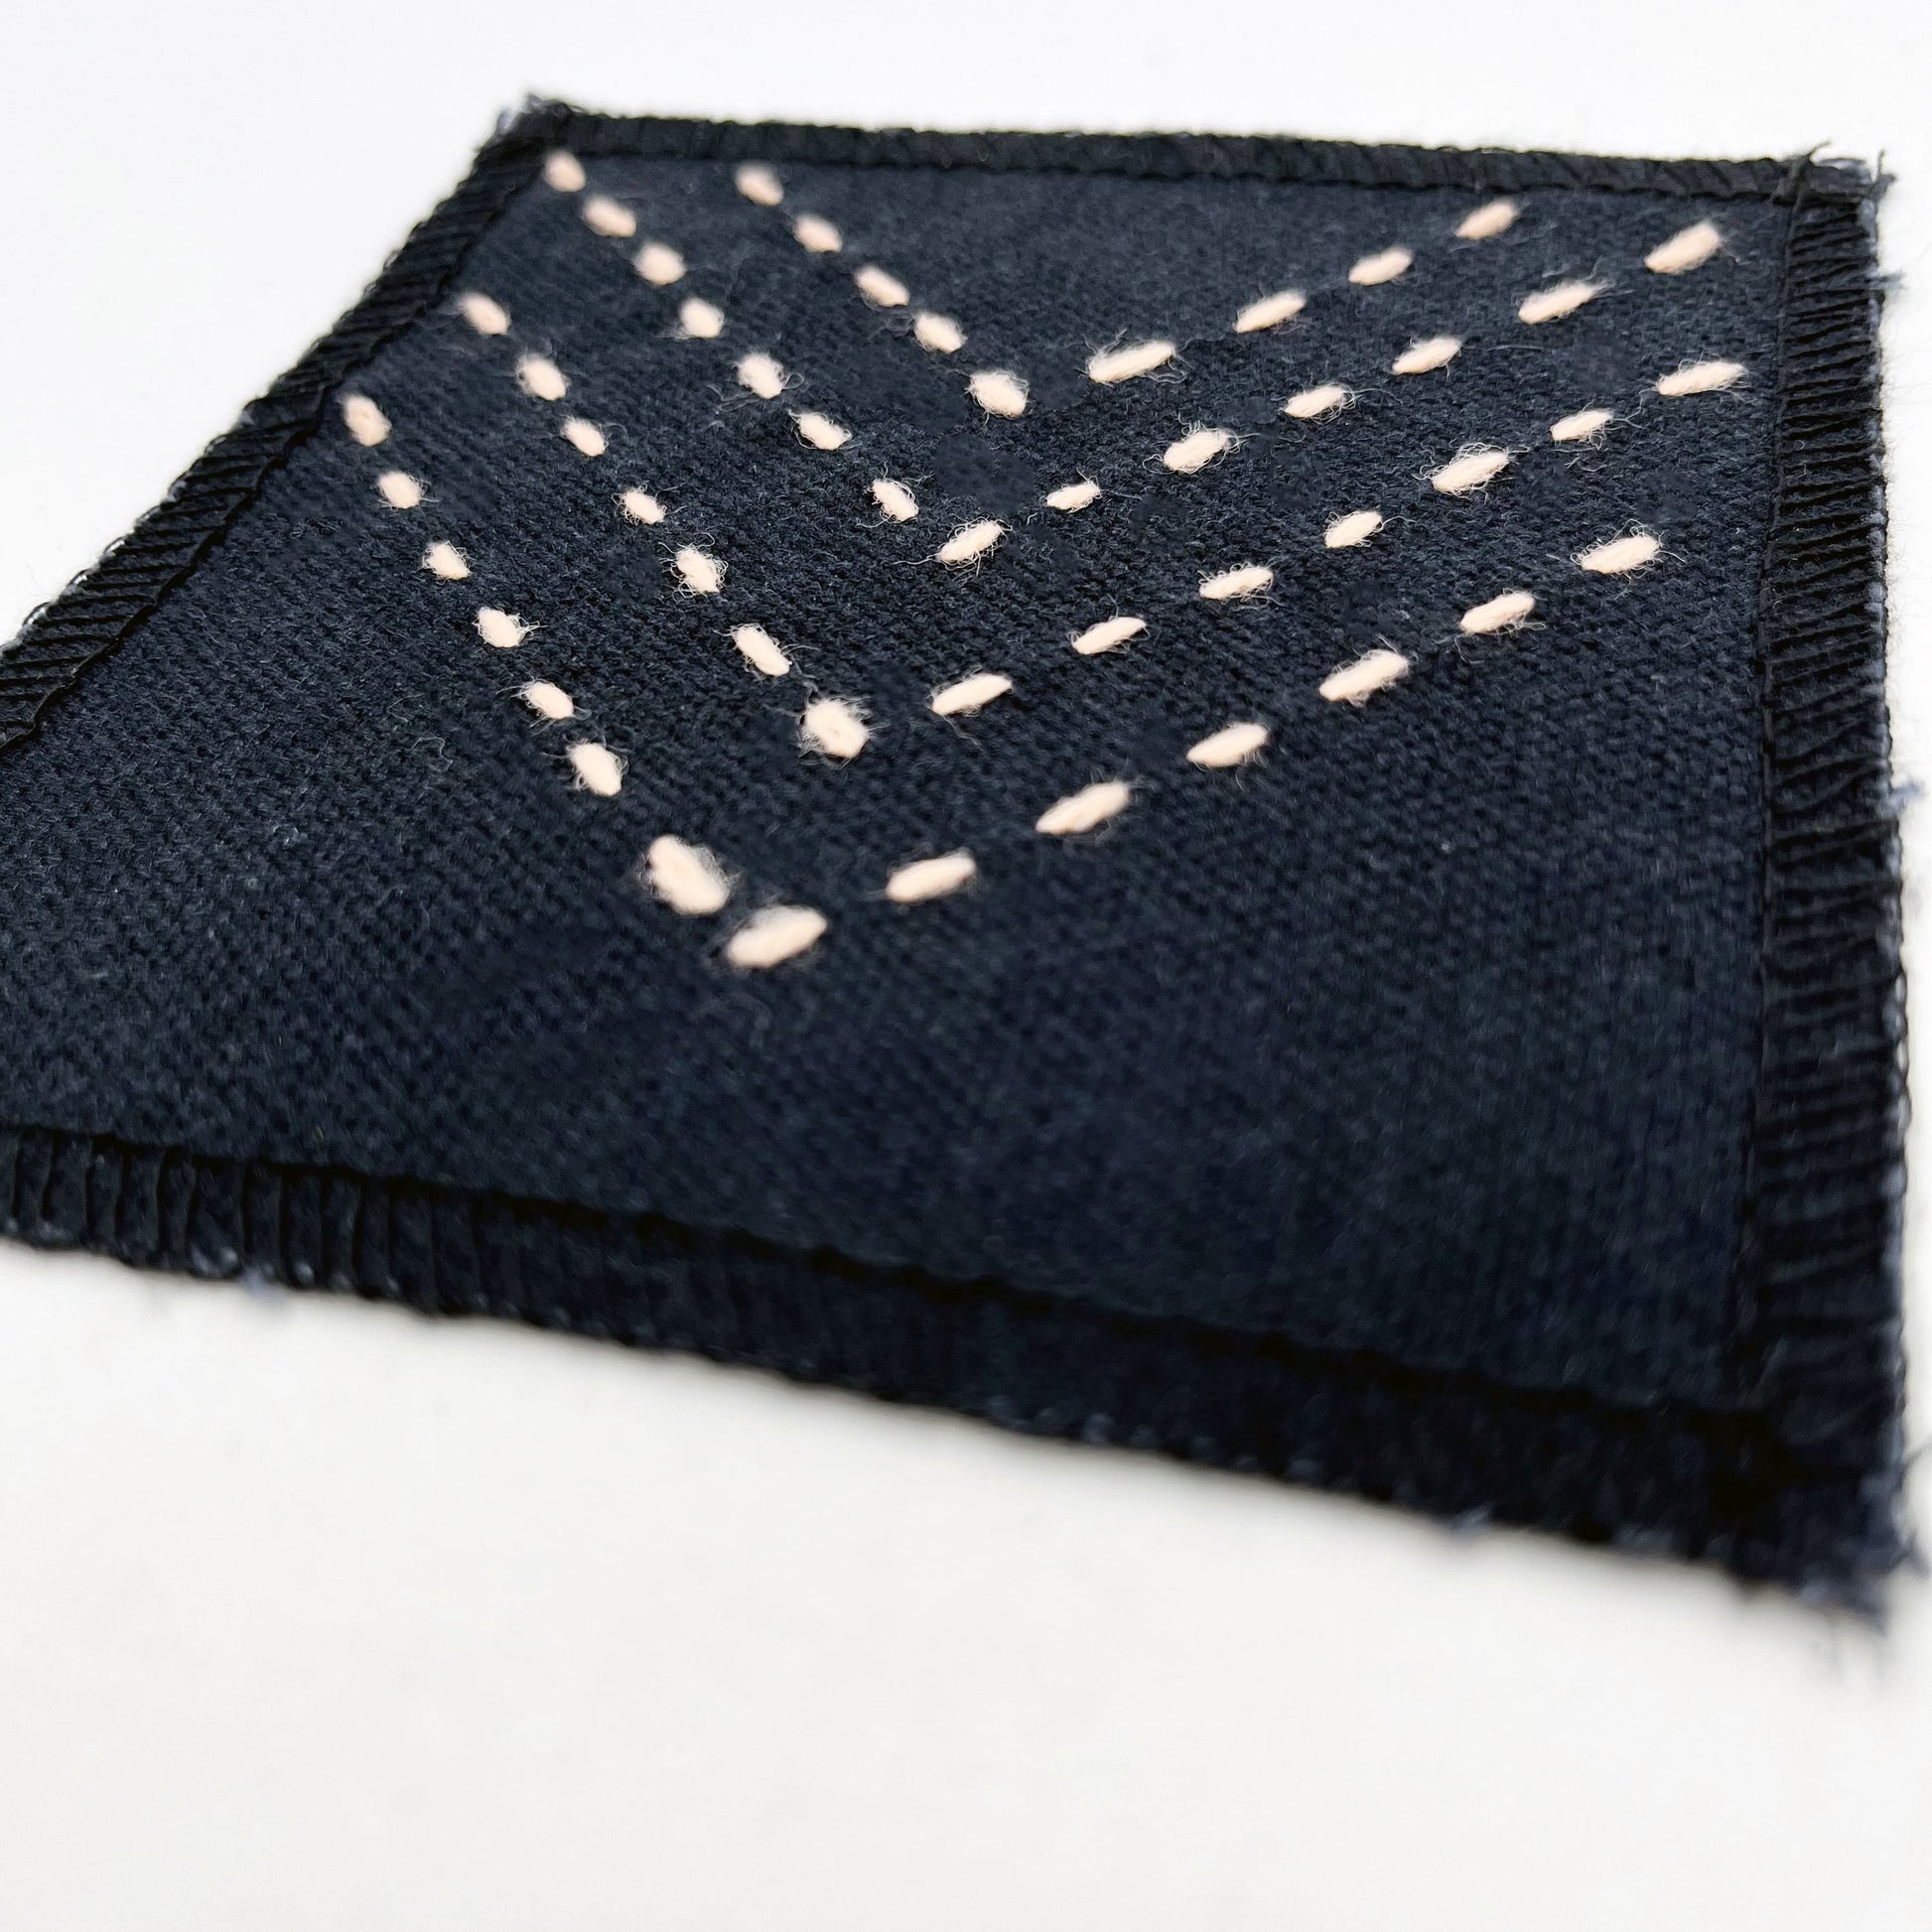 a close up angled view of a square patch made out of black canvas, handstitched with rows of peach running stitches in a chevron pattern, with overlocked edges, on a white background